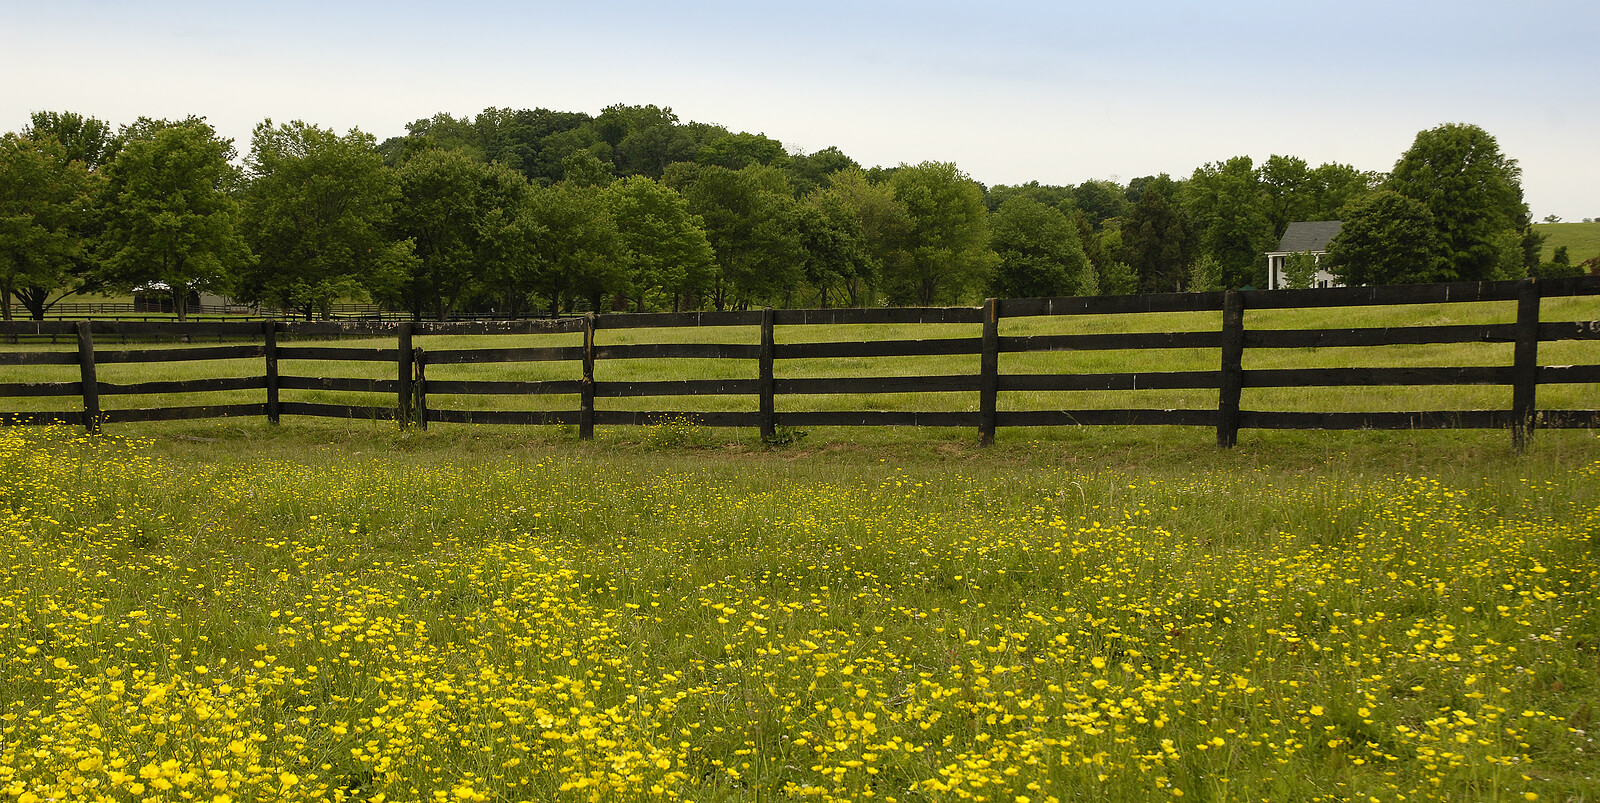 Beautiful field with yellow flowers and a rustic fence. Are you struggling to get past trauma and traditional therapy is not working? EMDR intensives in Virginia can help break through that wall.